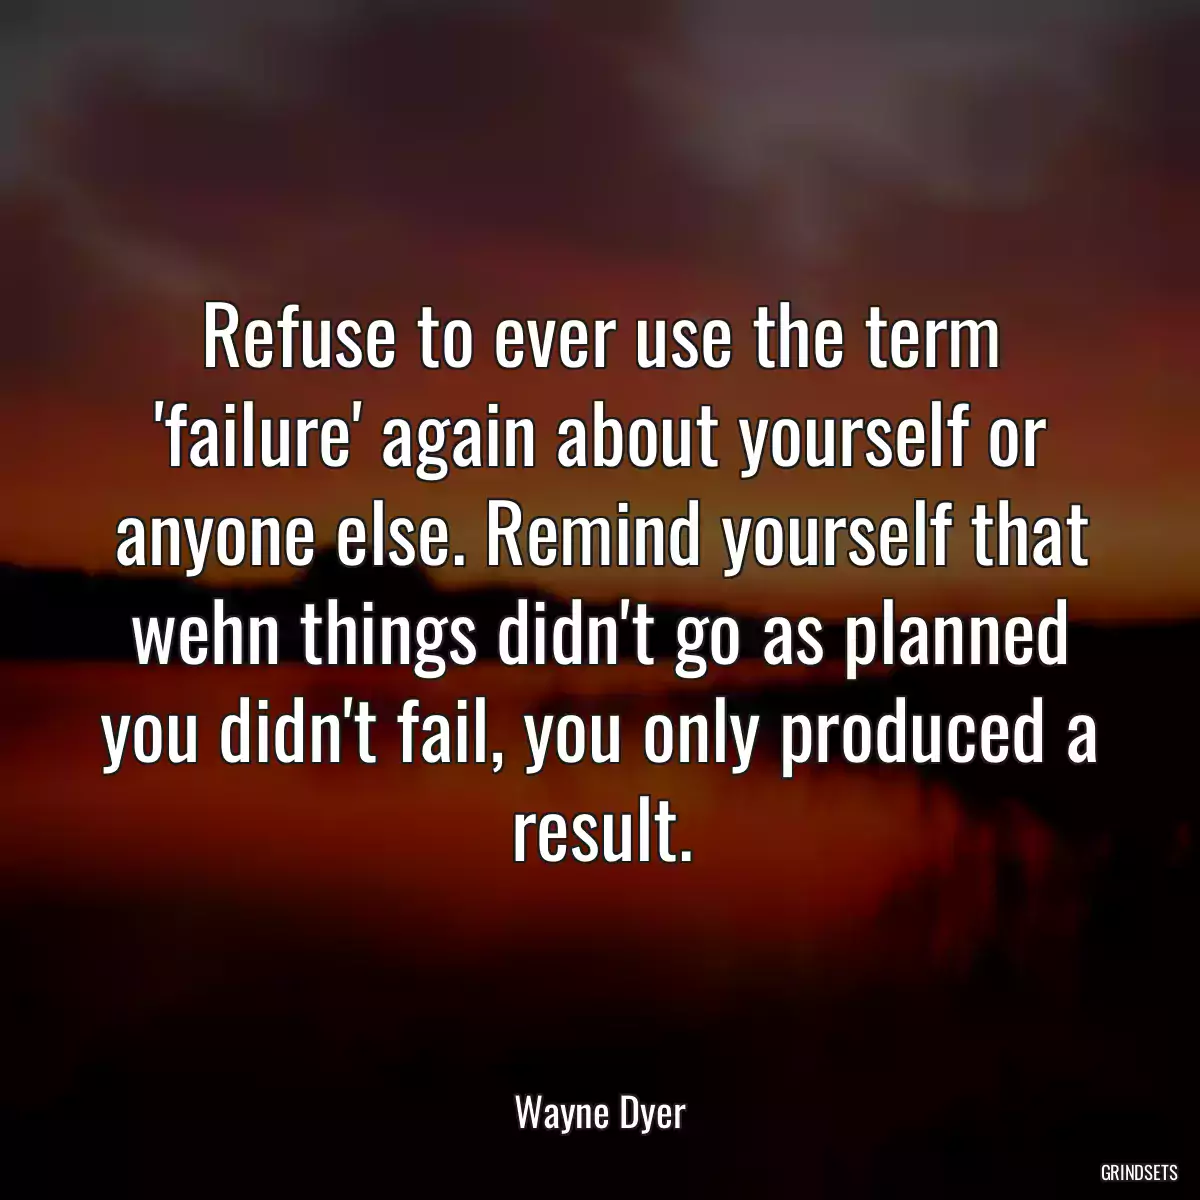 Refuse to ever use the term \'failure\' again about yourself or anyone else. Remind yourself that wehn things didn\'t go as planned you didn\'t fail, you only produced a result.